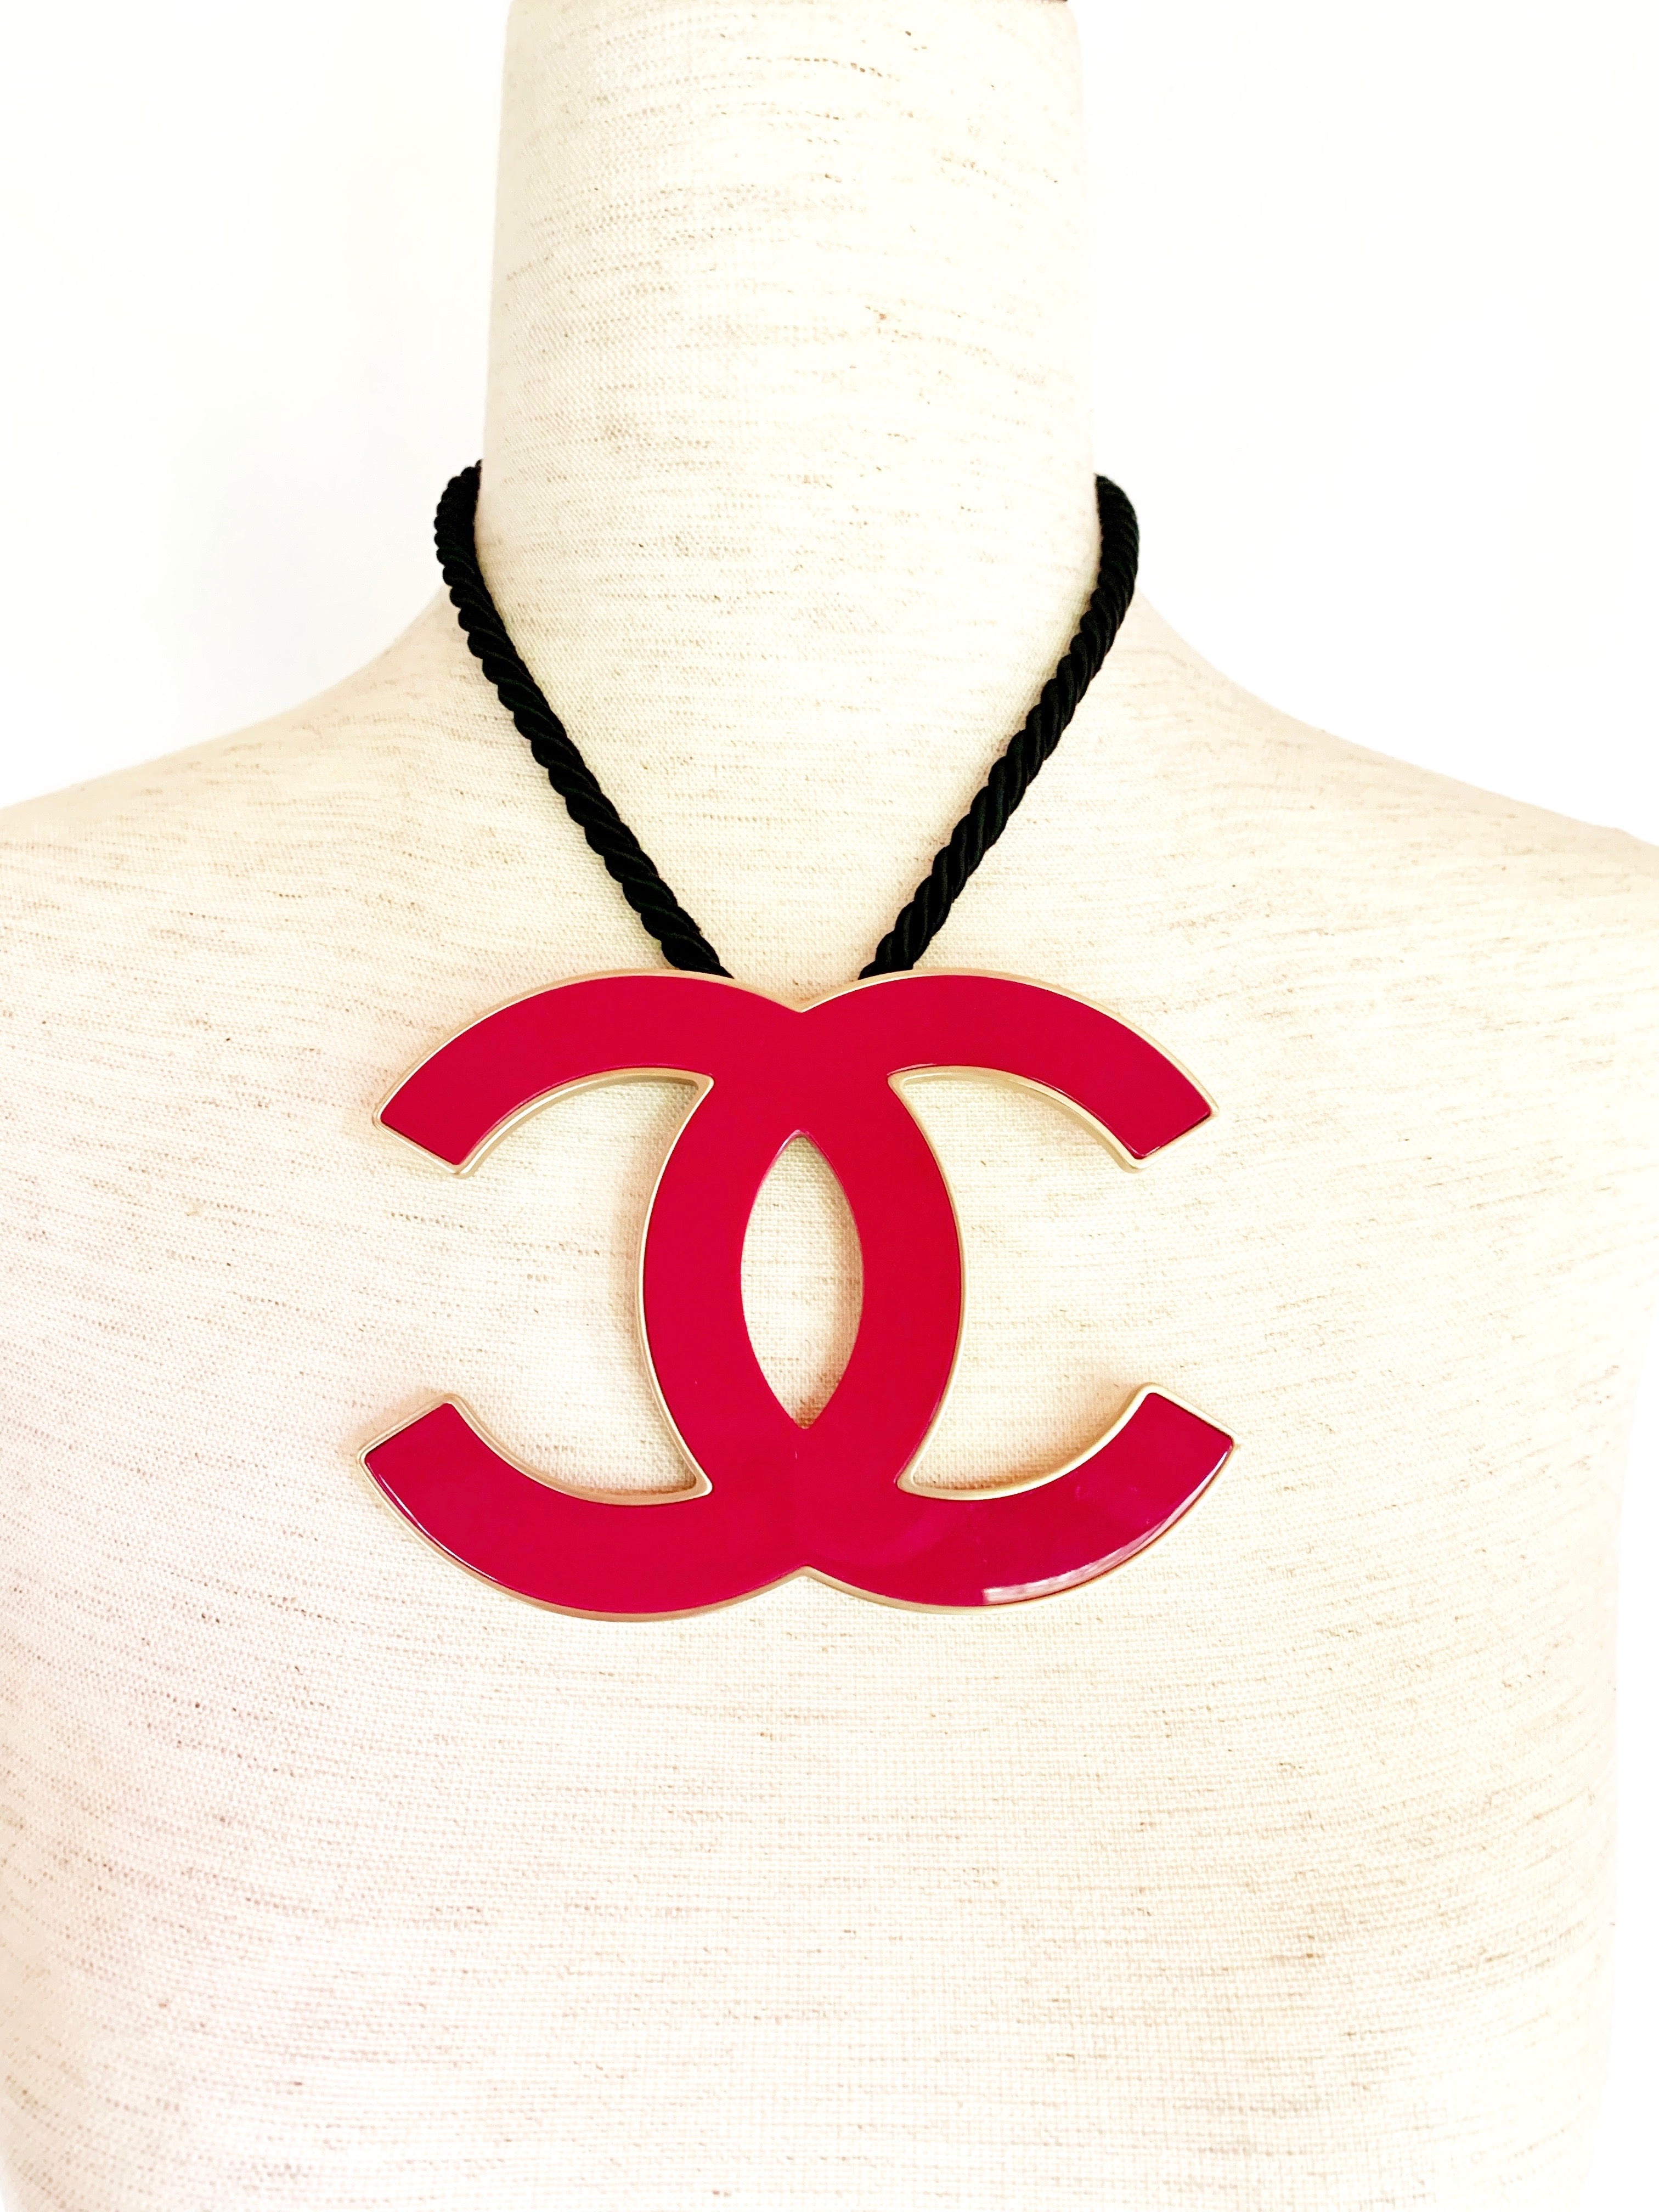 CHANEL Velvet Gripoix Crystal CC Choker Necklace Red Gold 511012